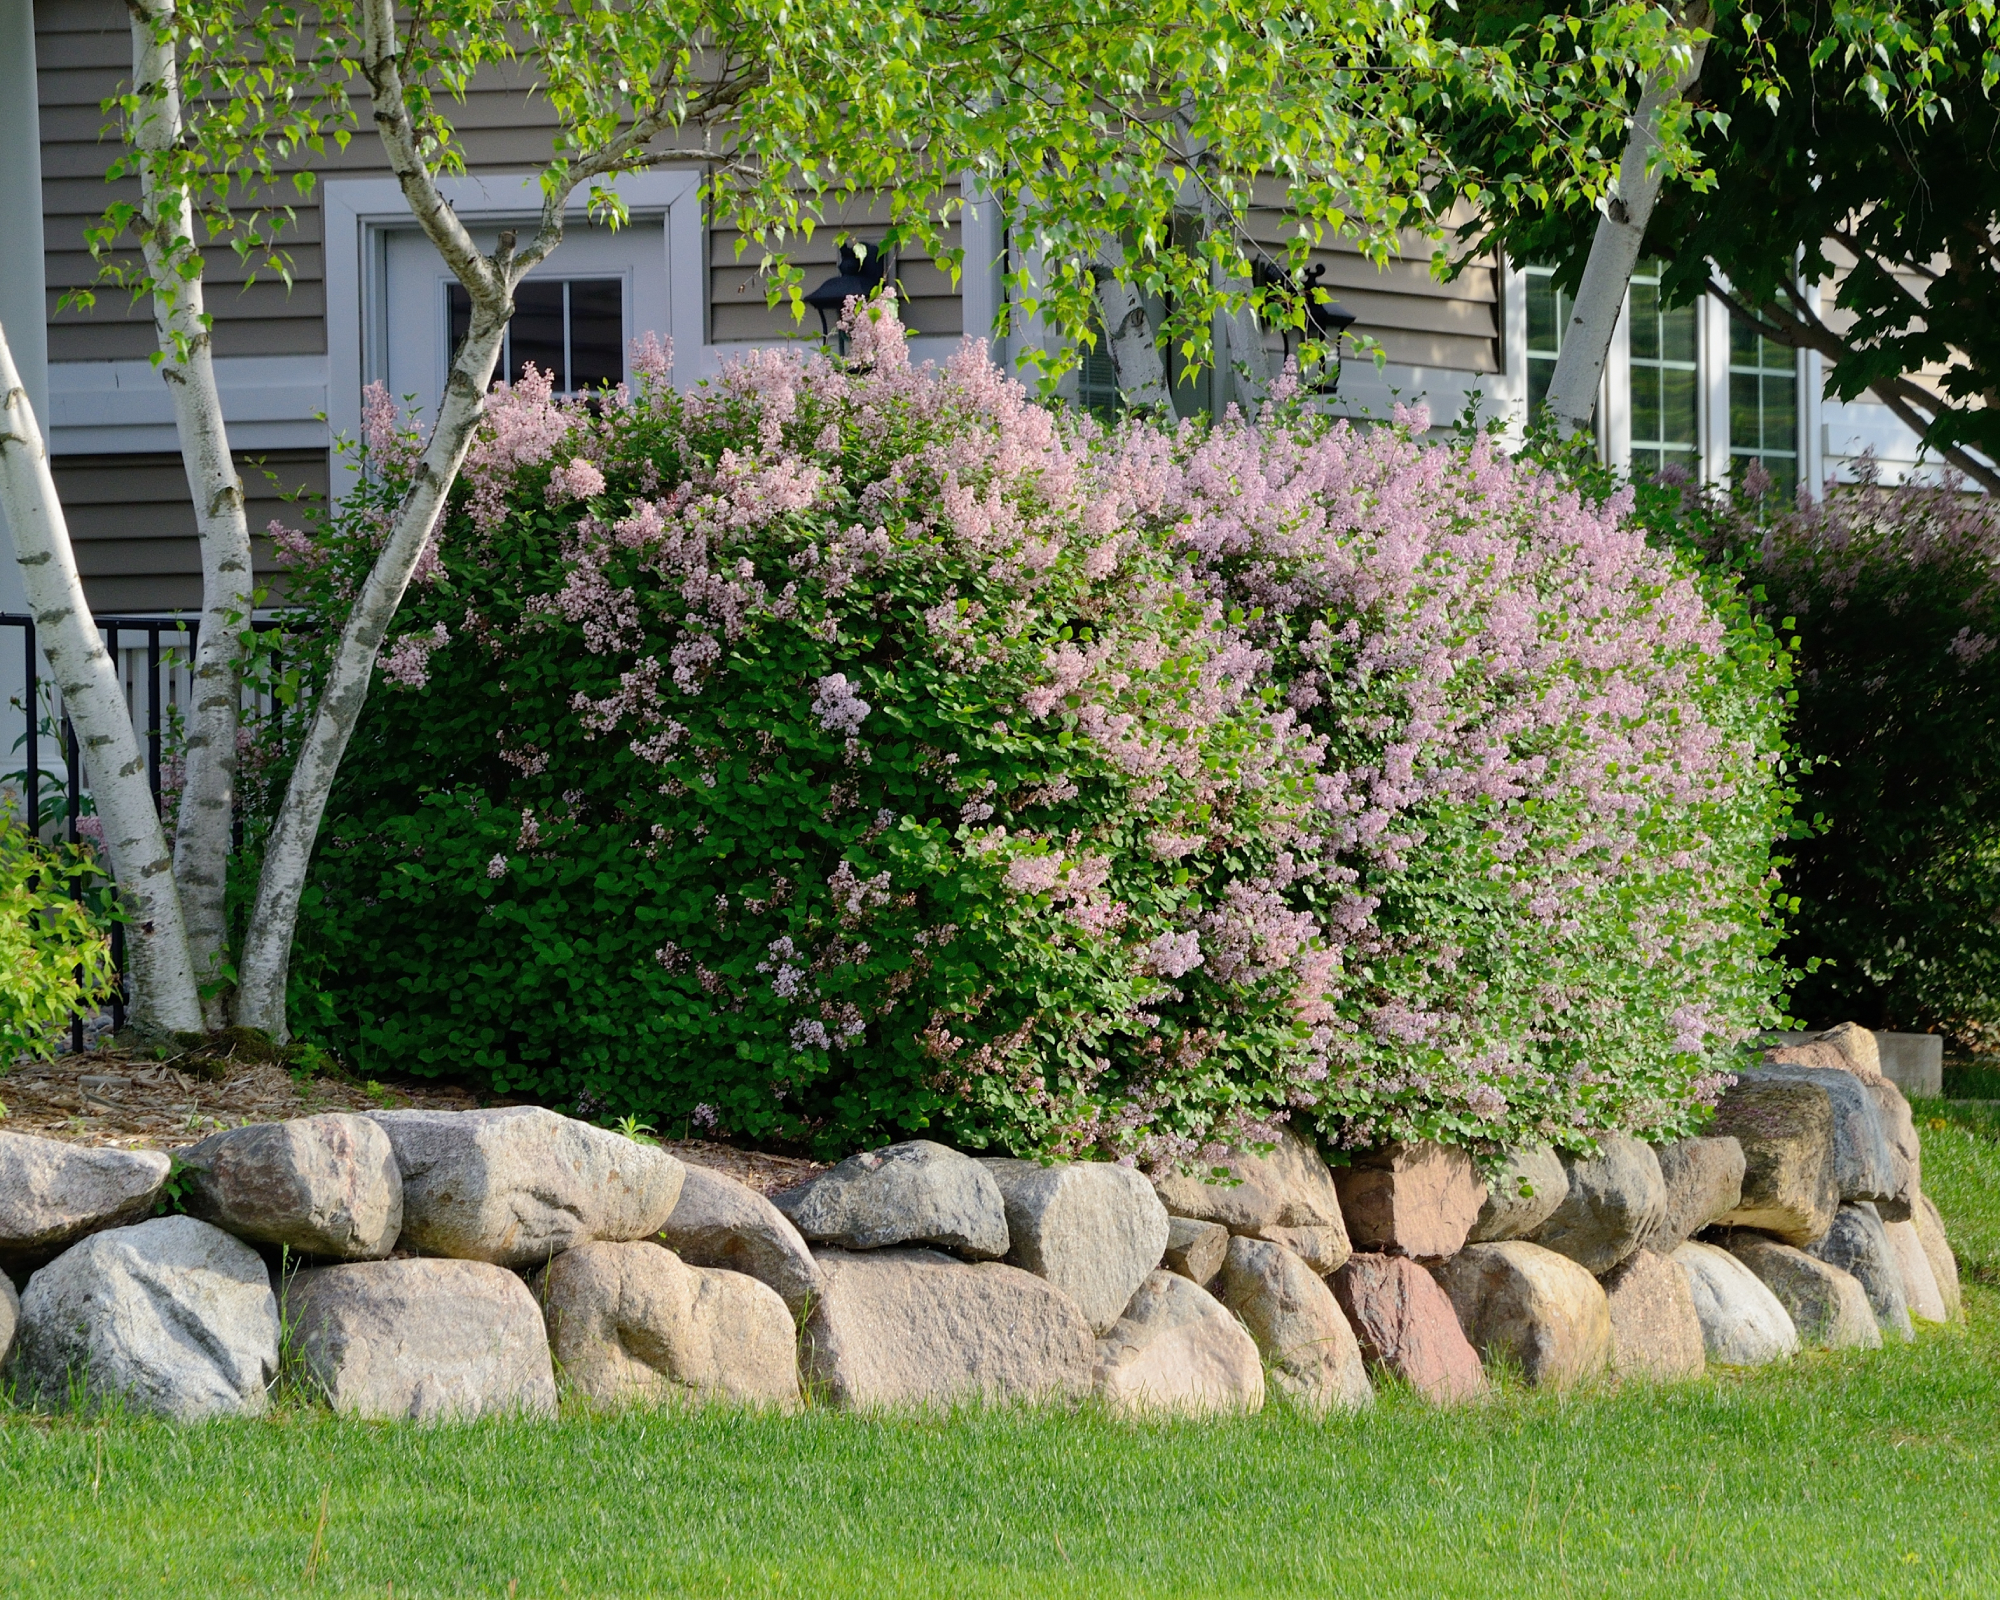 Lilac bushes, a stone retaining wall, and birch trees in a low-maintenance front yard